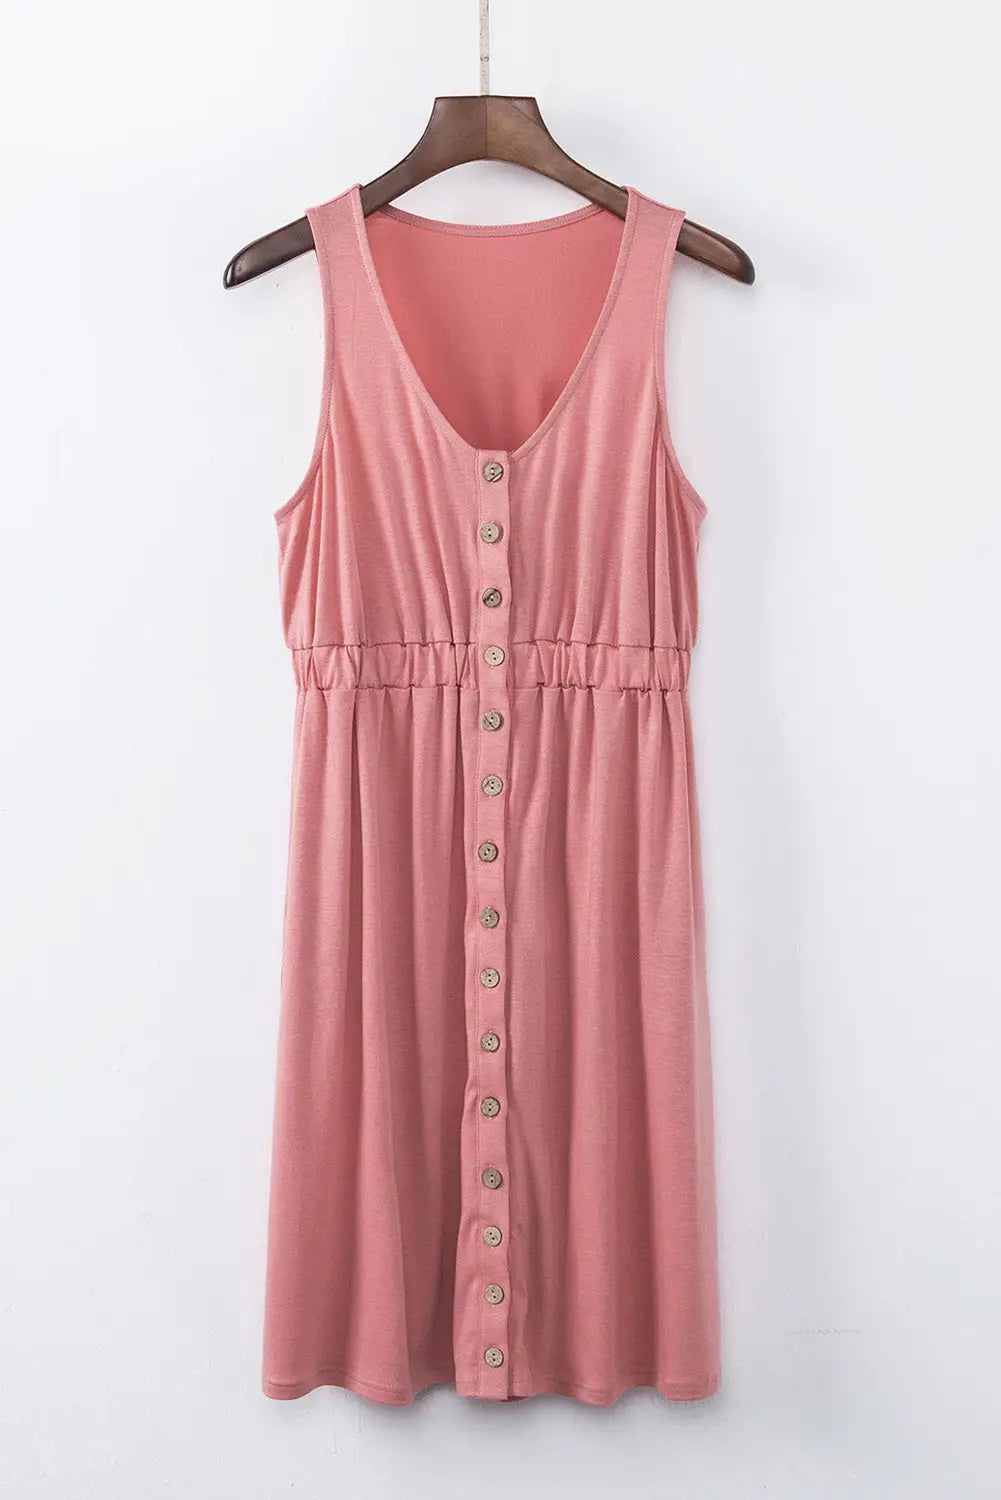 Pink solid button front plus size long sleeve dress